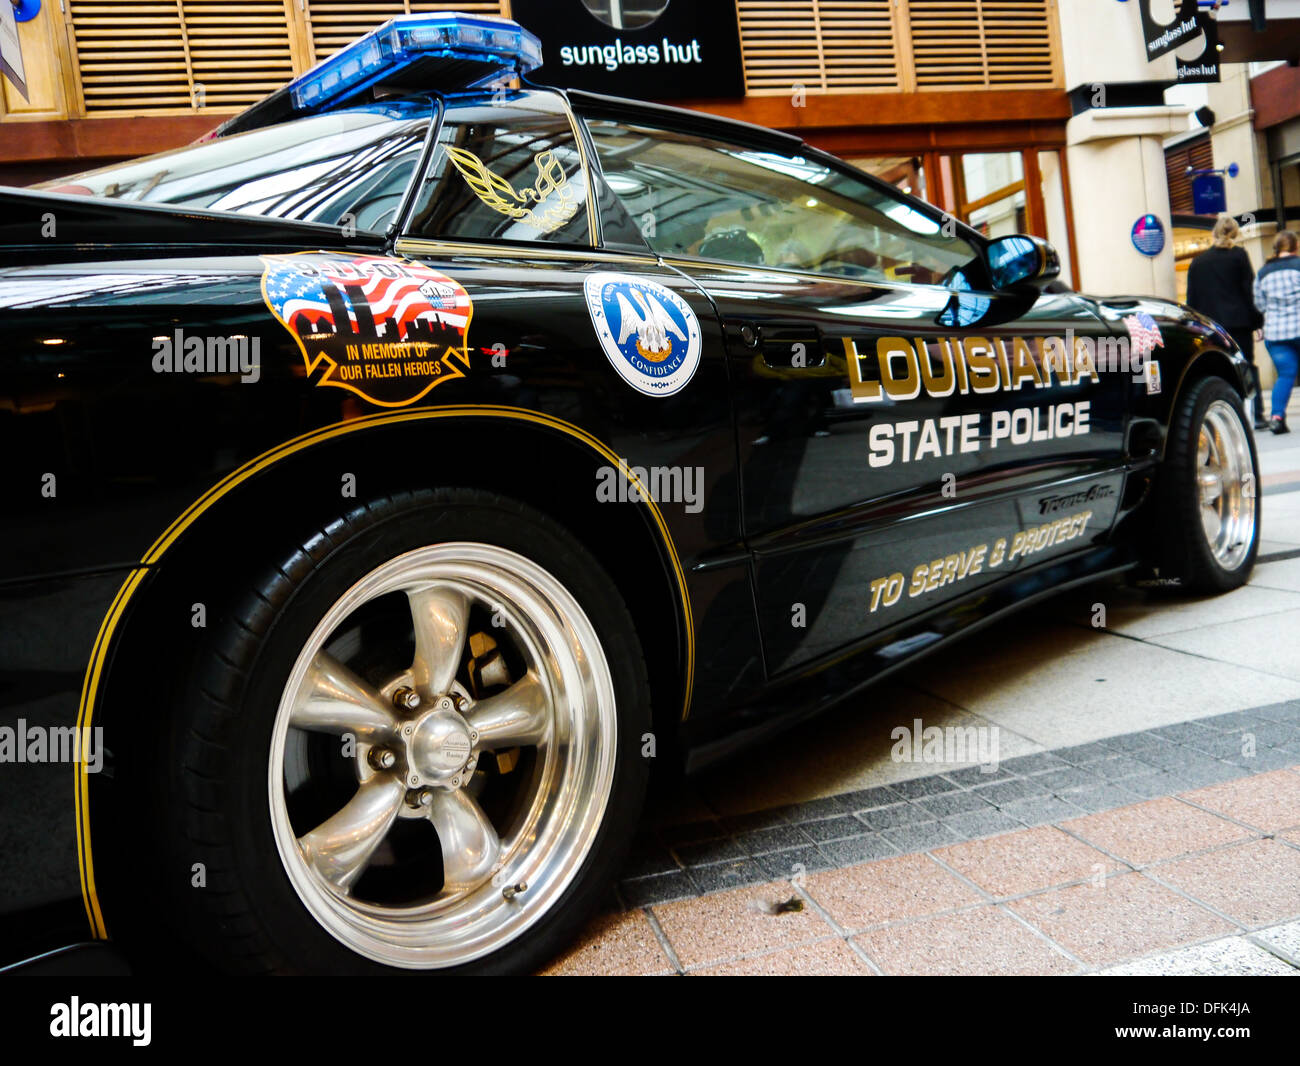 Pontiac Trans am Firebird classic car in the colours of the Louisiana state police department Stock Photo